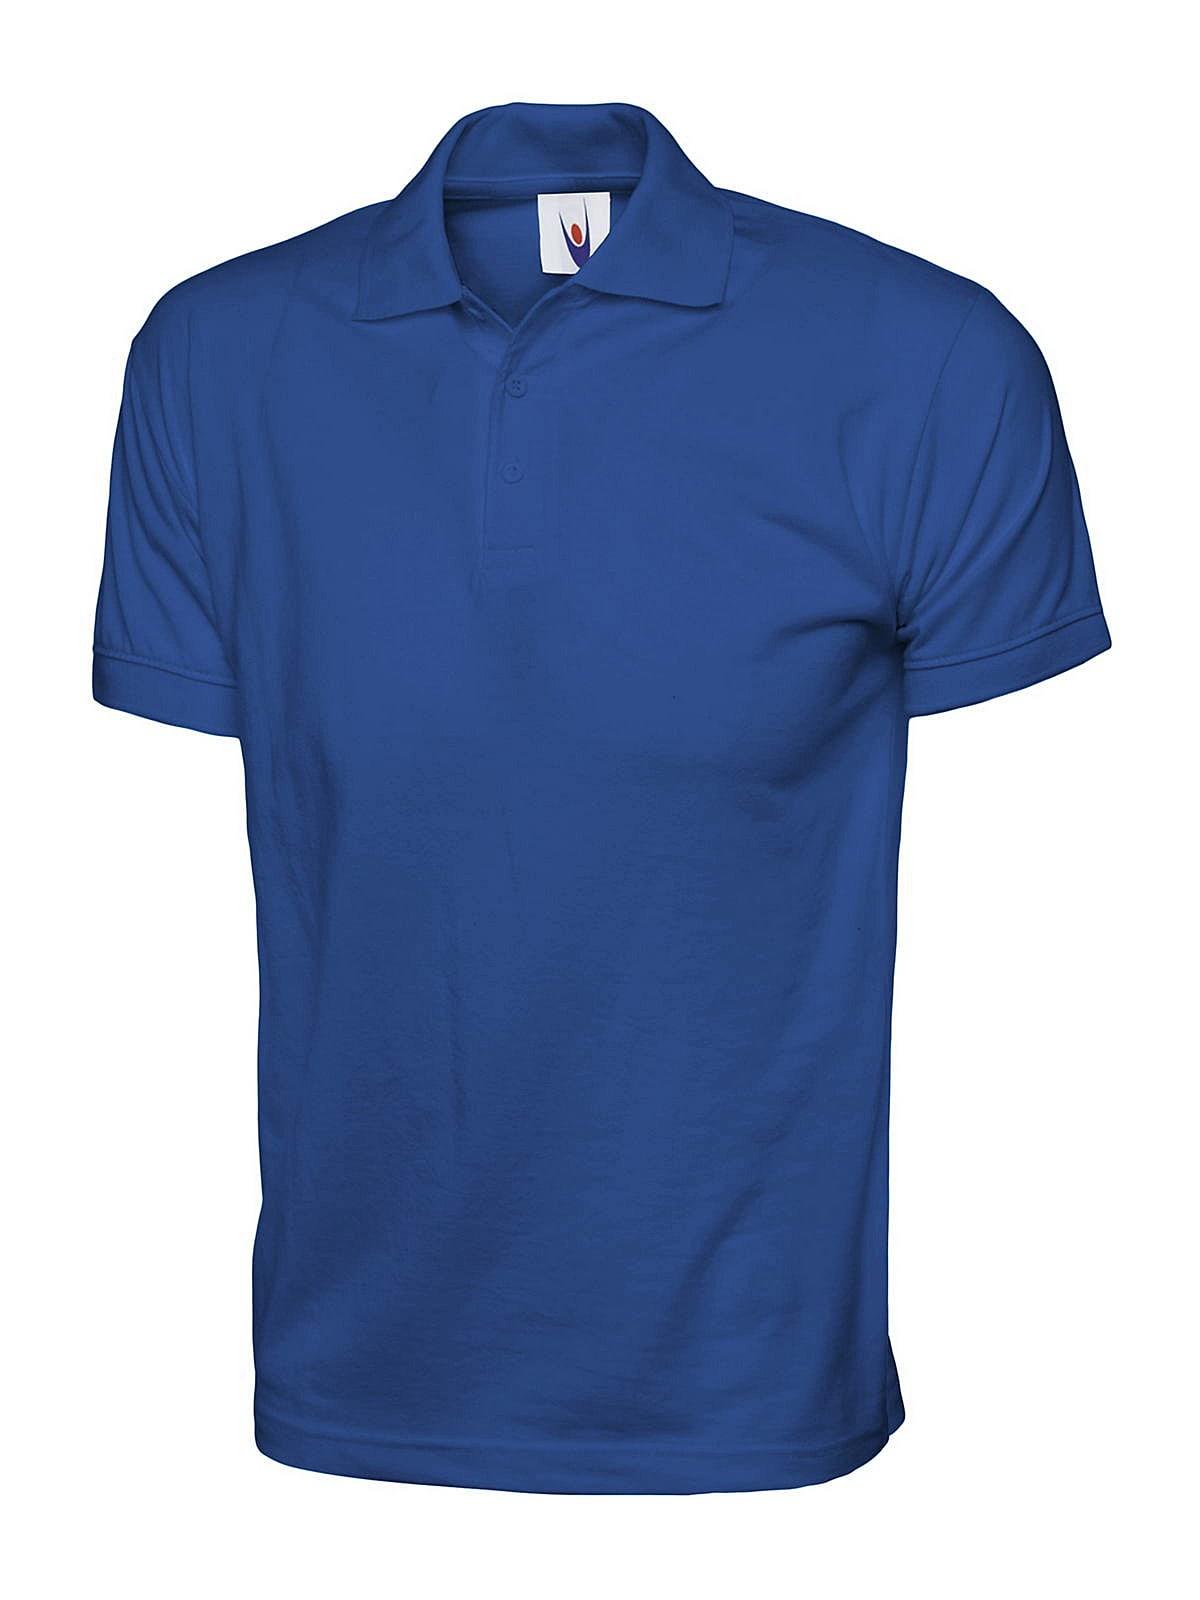 Uneek 200GSM Jersey Polo Shirt in Royal Blue (Product Code: UC122)